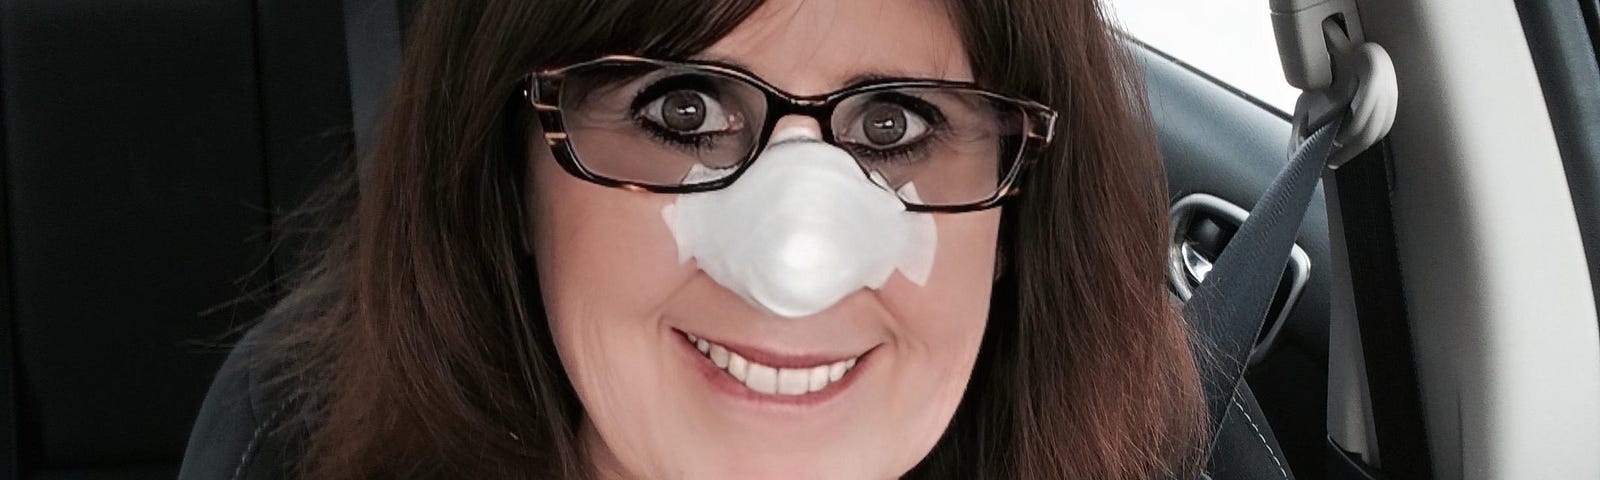 Picture of author (woman) driving with a big white bandage on her nose after skin cancer surgery.